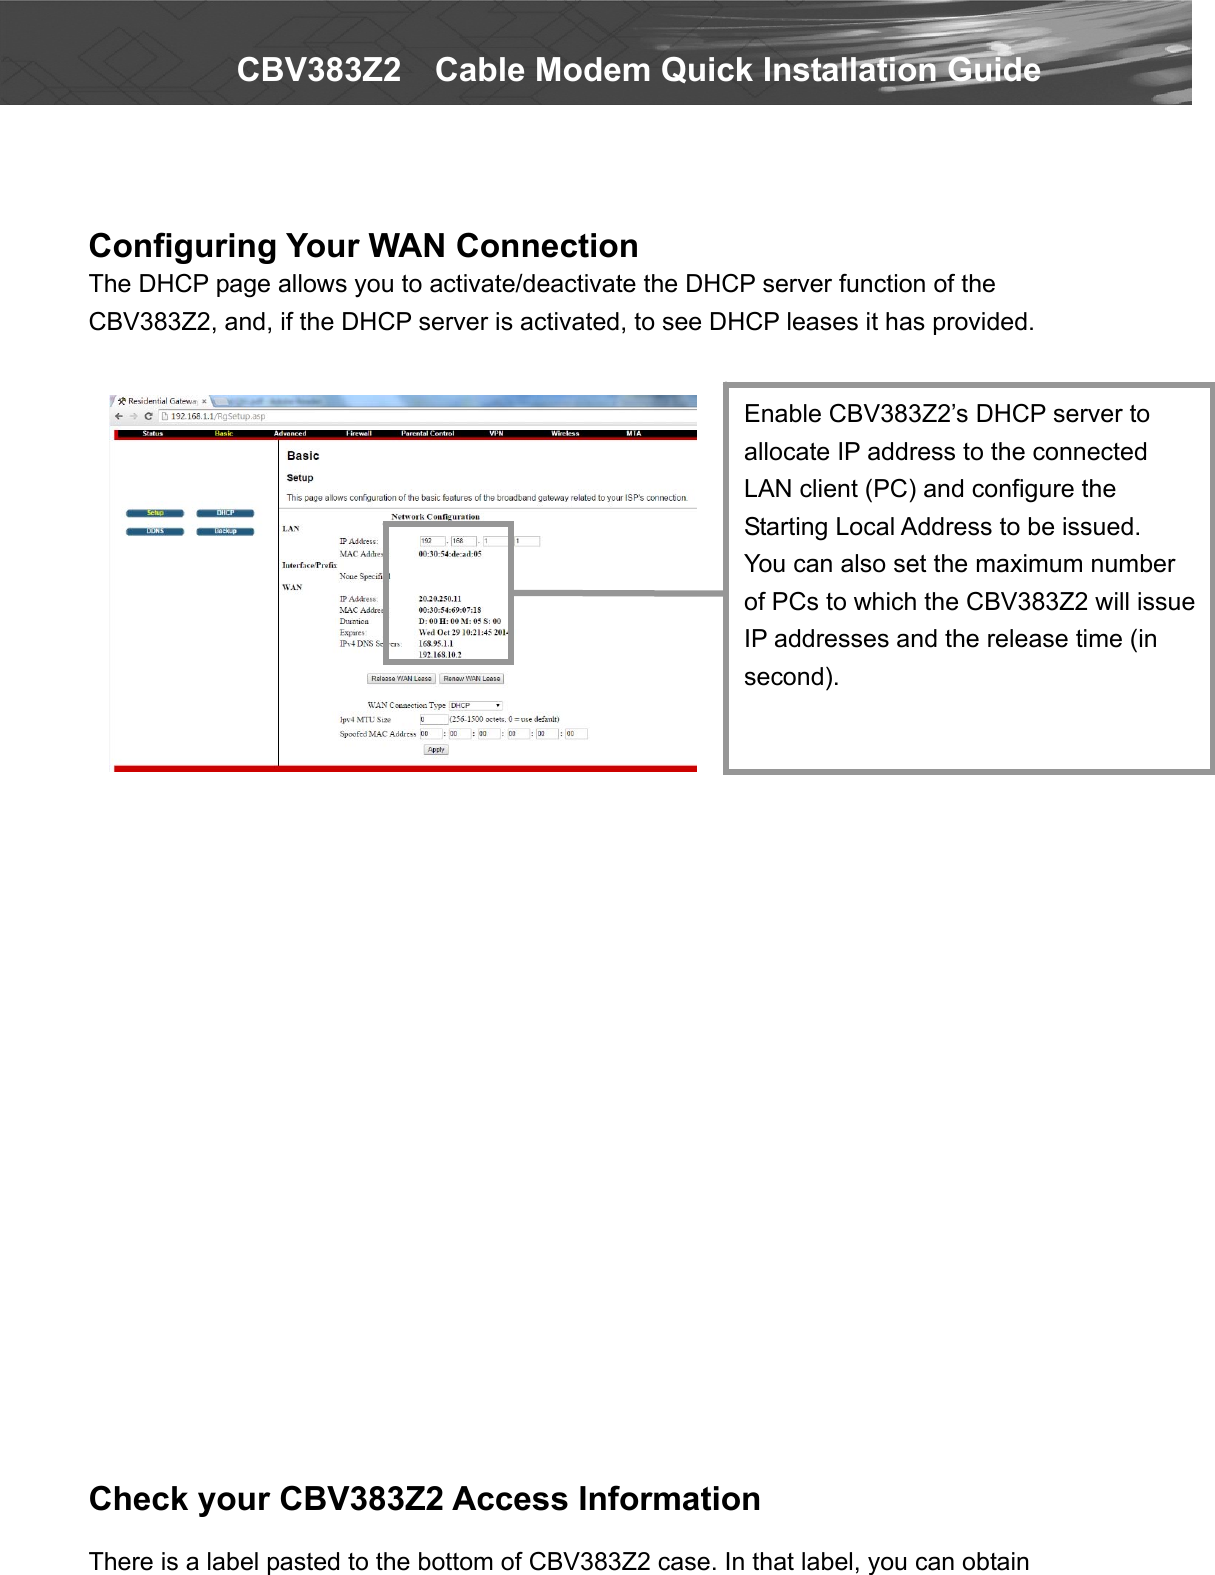   CBV383Z2    Cable Modem Quick Installation Guide   Configuring Your WAN Connection The DHCP page allows you to activate/deactivate the DHCP server function of the CBV383Z2, and, if the DHCP server is activated, to see DHCP leases it has provided.                           Check your CBV383Z2 Access Information  There is a label pasted to the bottom of CBV383Z2 case. In that label, you can obtain Enable CBV383Z2’s DHCP server to allocate IP address to the connected LAN client (PC) and configure the Starting Local Address to be issued. You can also set the maximum number of PCs to which the CBV383Z2 will issue IP addresses and the release time (in second). 